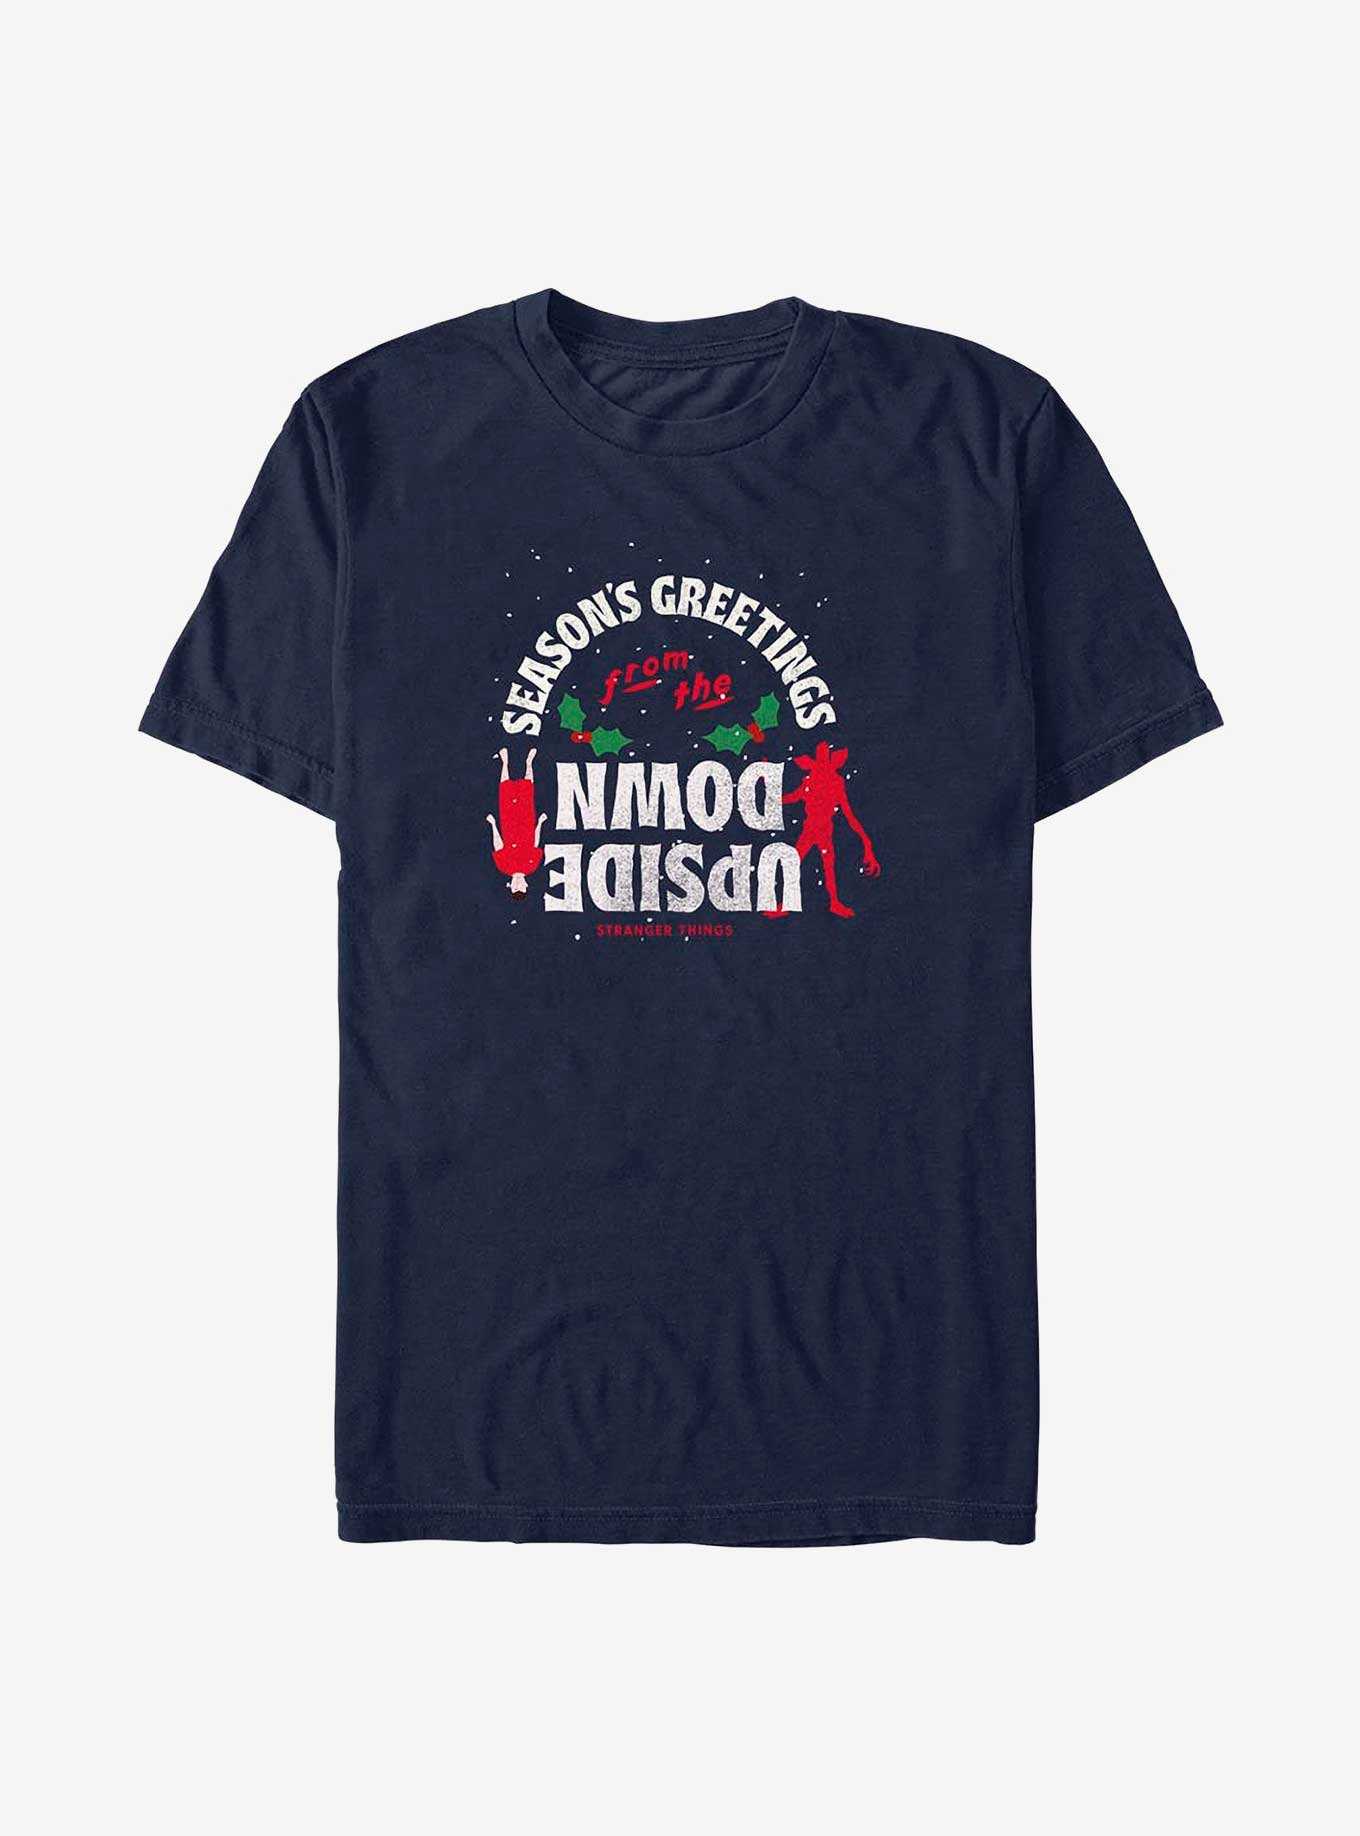 Stranger Things Season's Greetings From The Upside Down T-Shirt, , hi-res